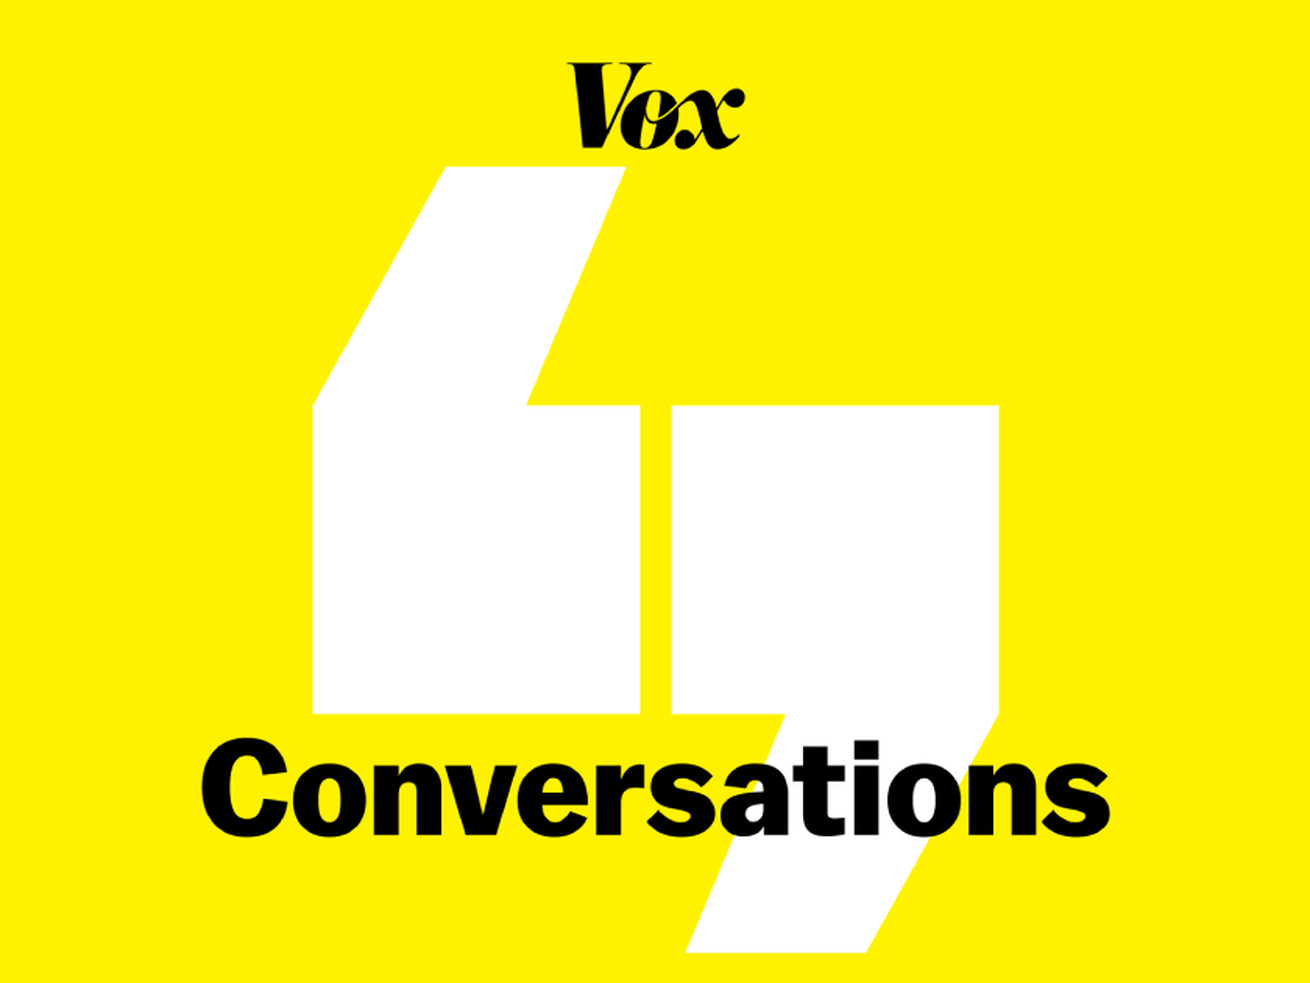 Vox’s Sean Illing to Take the Helm as Host of Vox Conversations